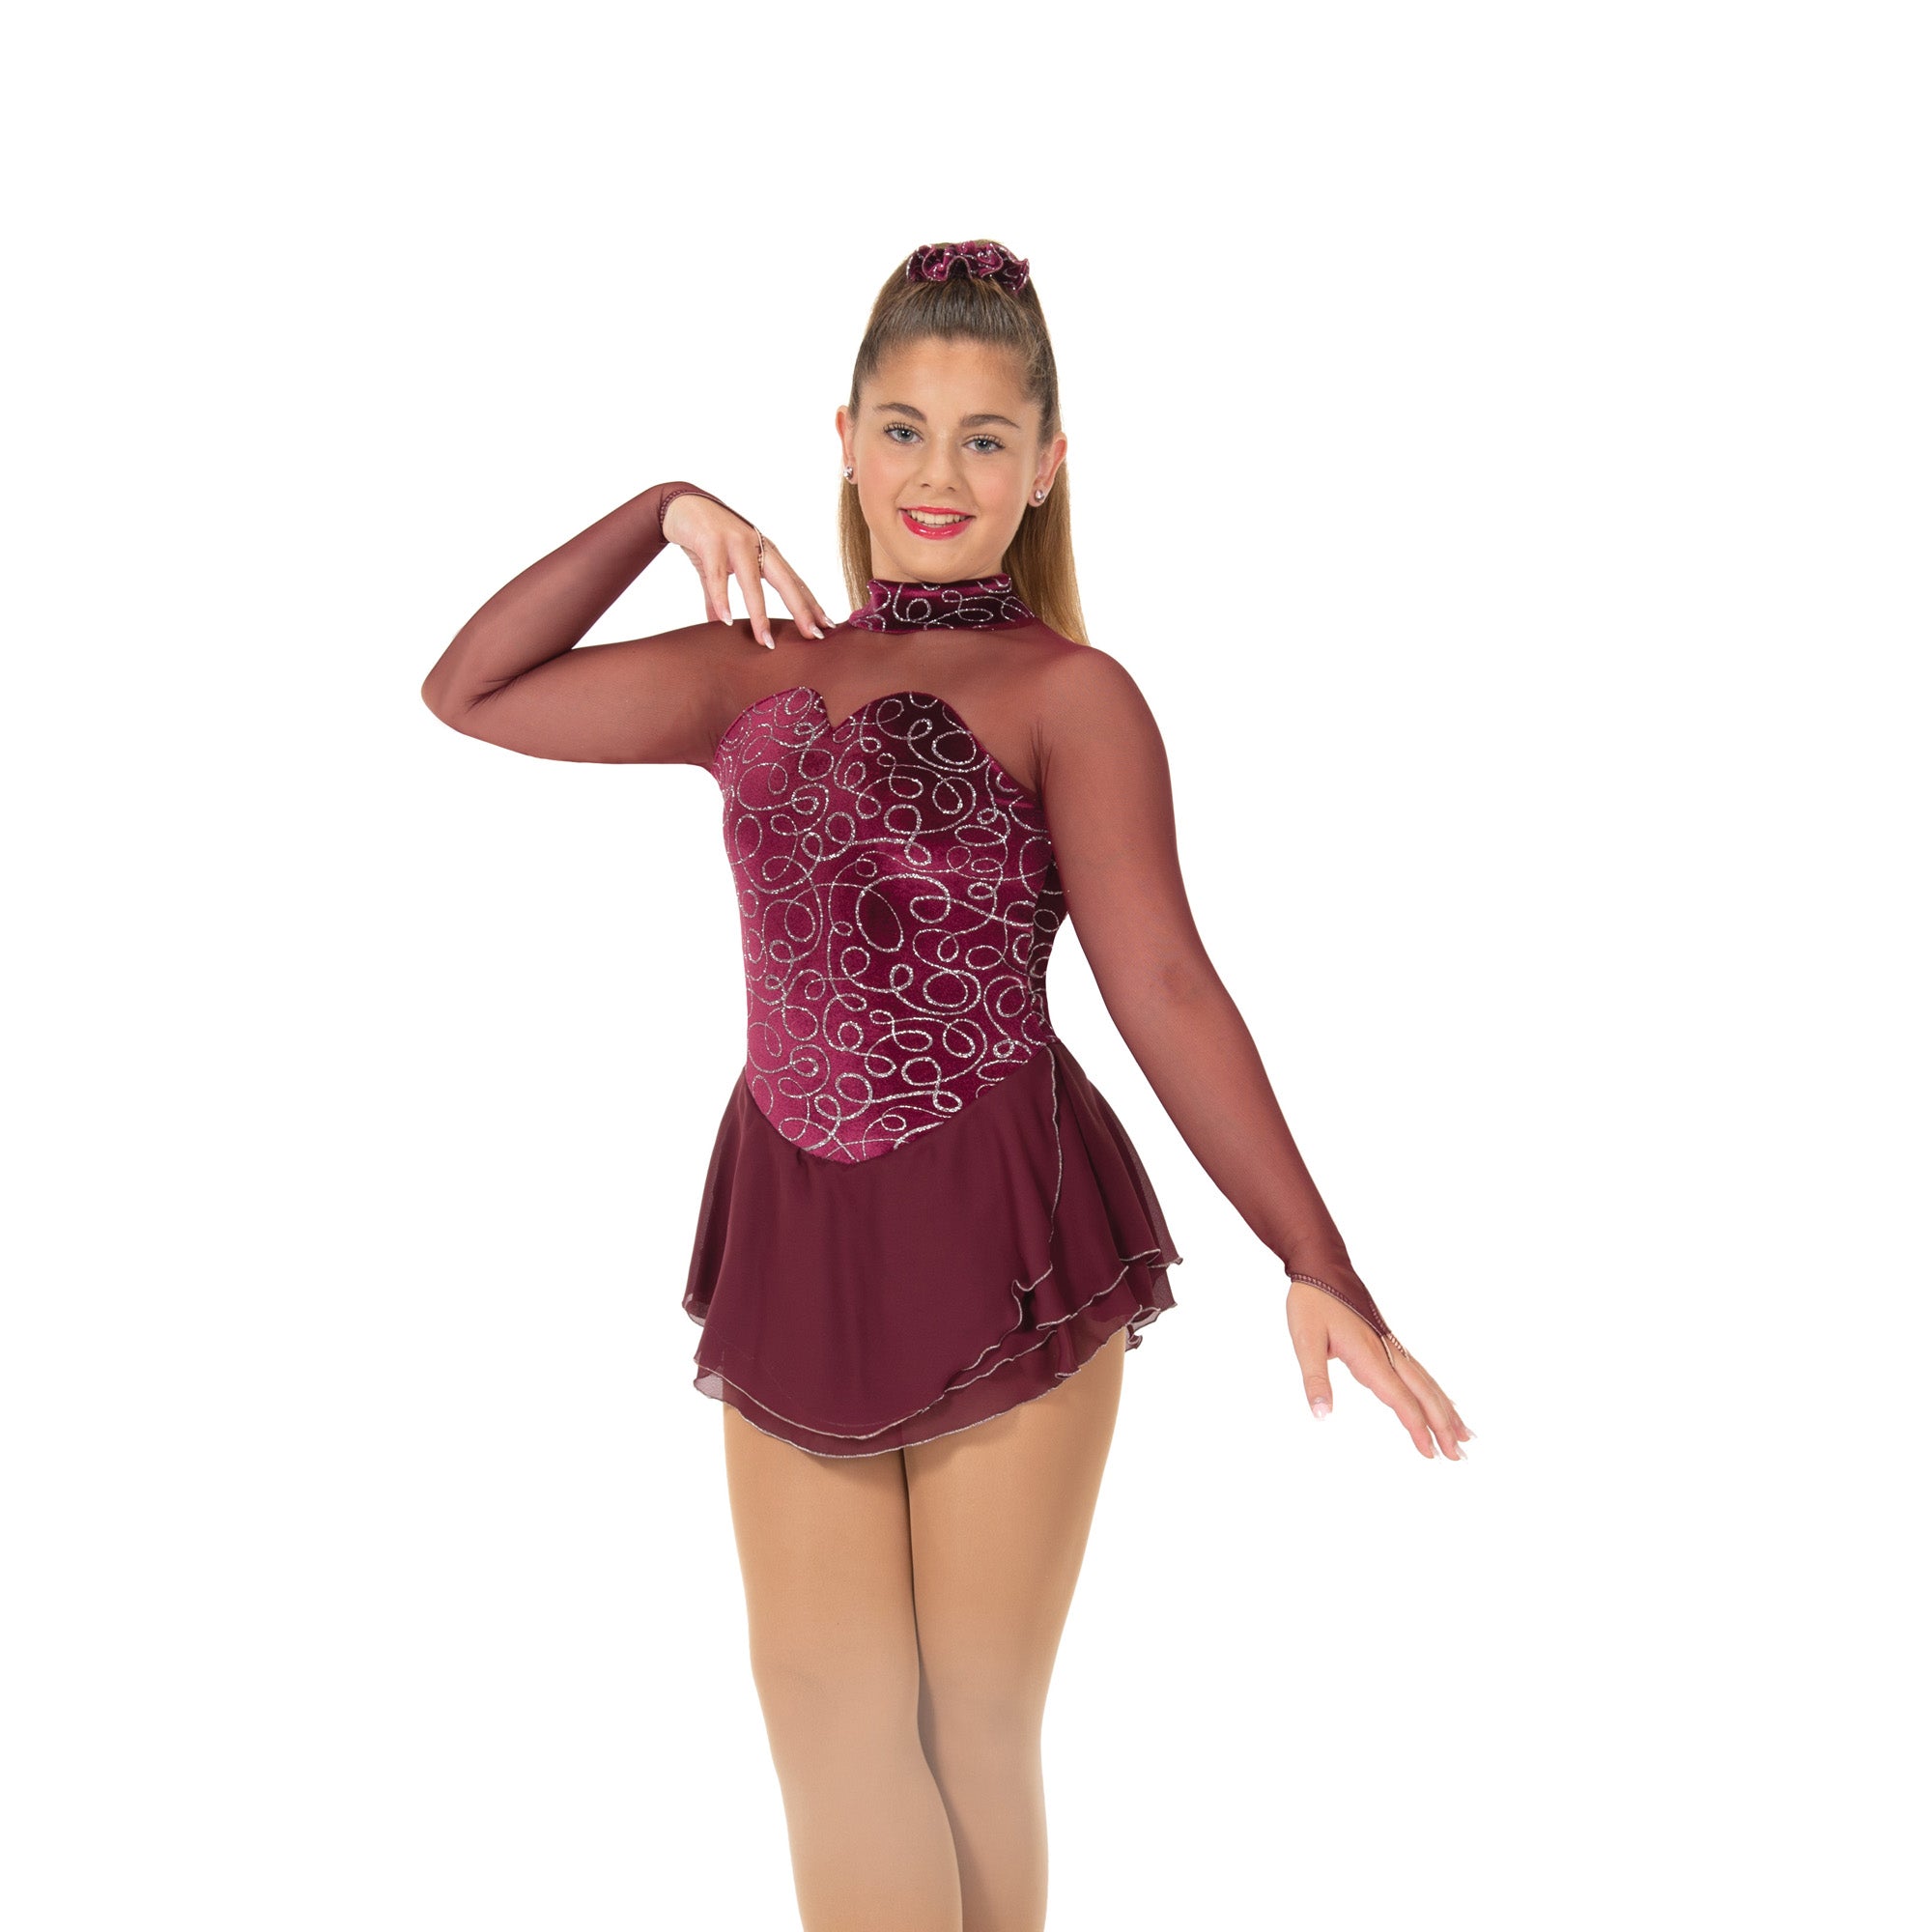 62 The Loop Swoop Skating Dress in Bordeaux Red by Jerry's